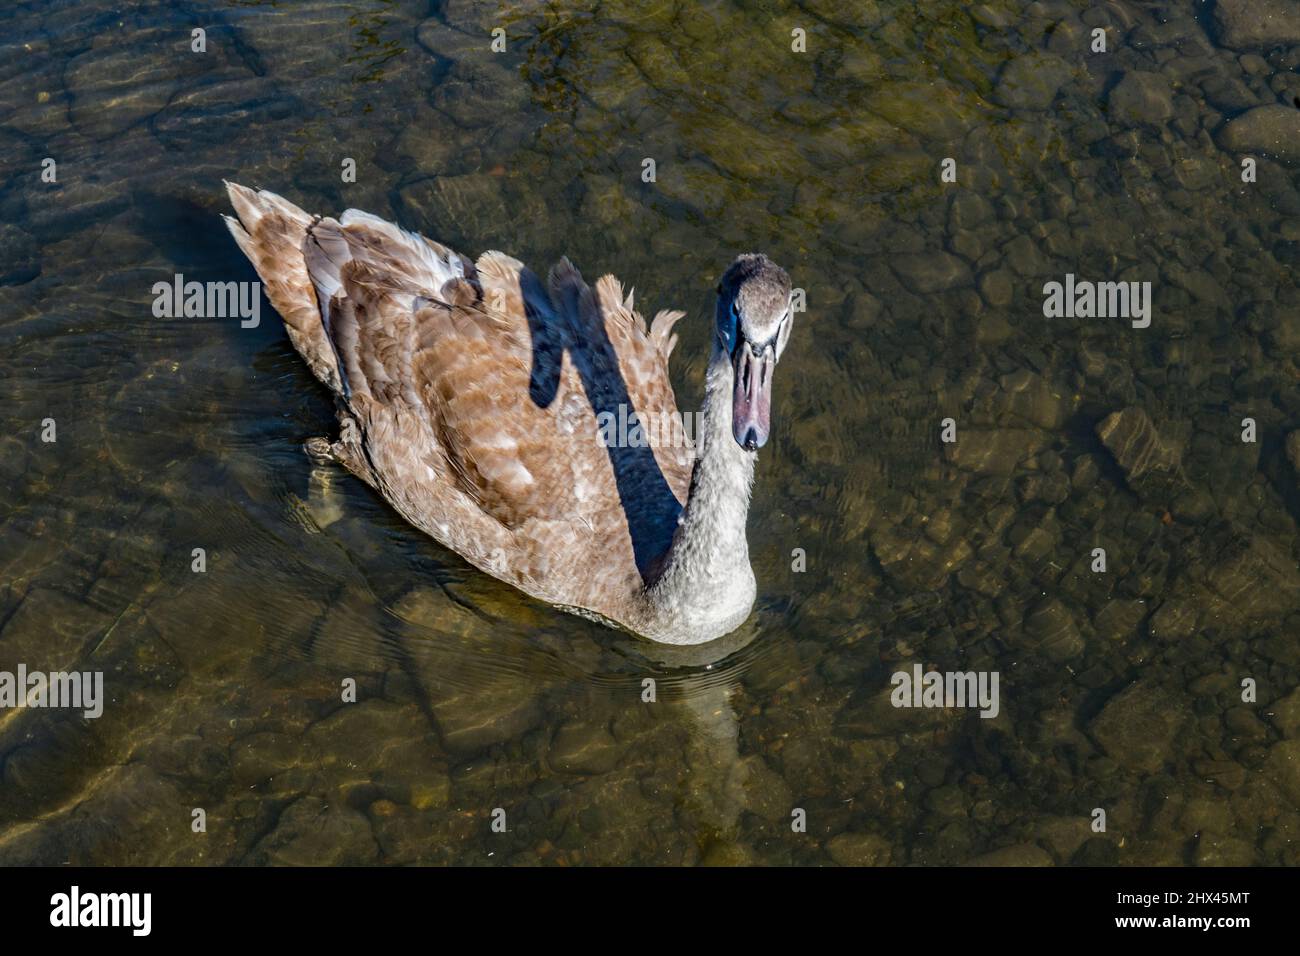 A cygnet swan swimming at Cardiff Wetlands Cardiff Bay South Wales Stock Photo